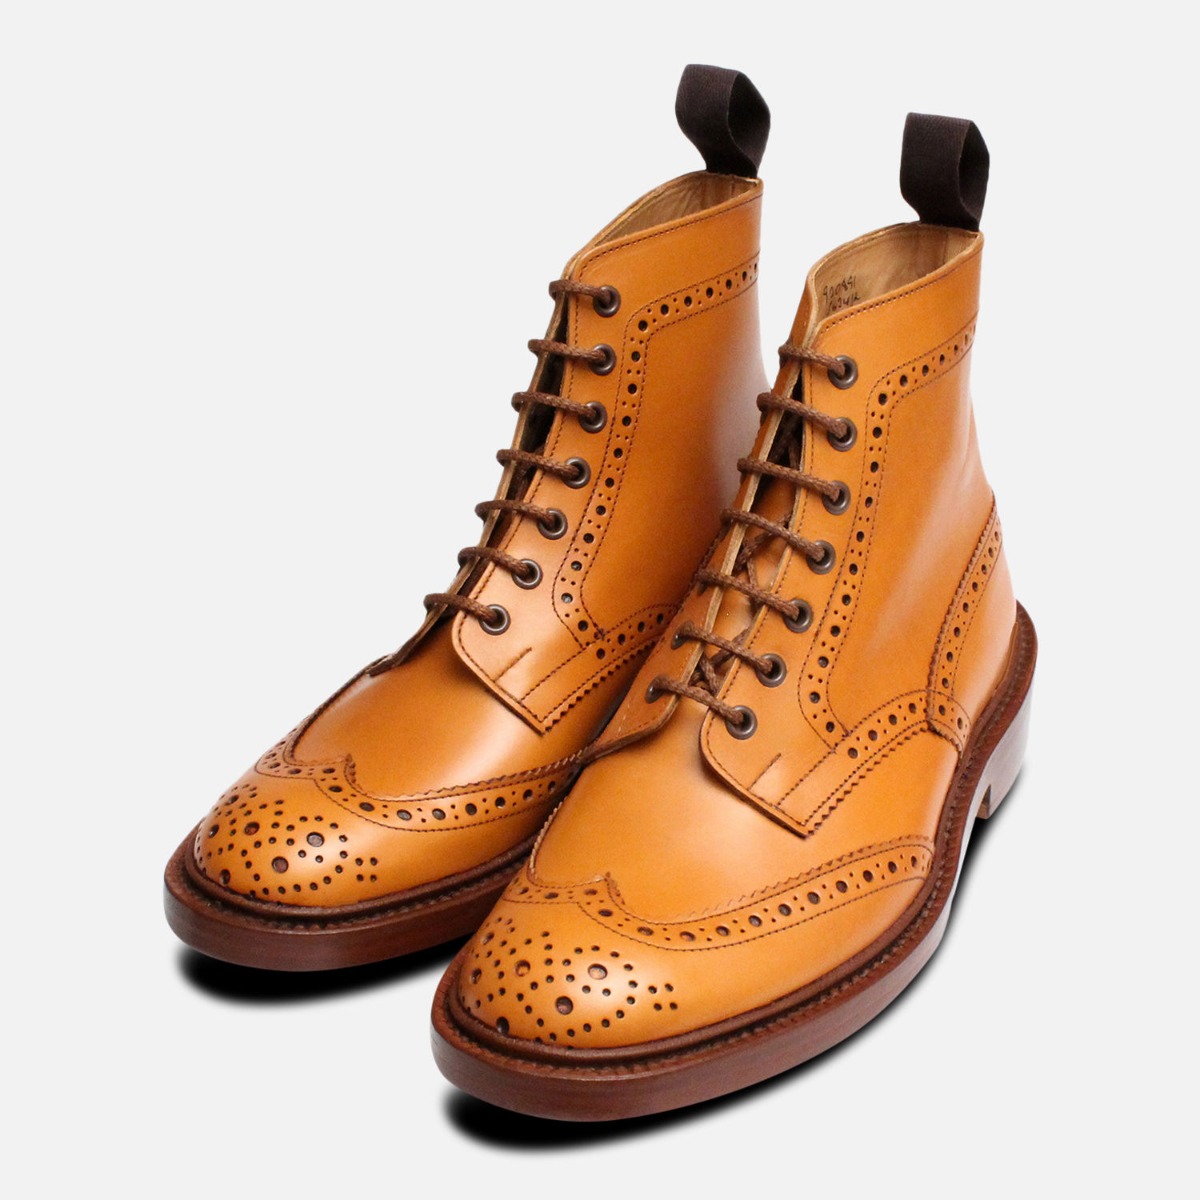 Buy > trickers boots mens > in stock